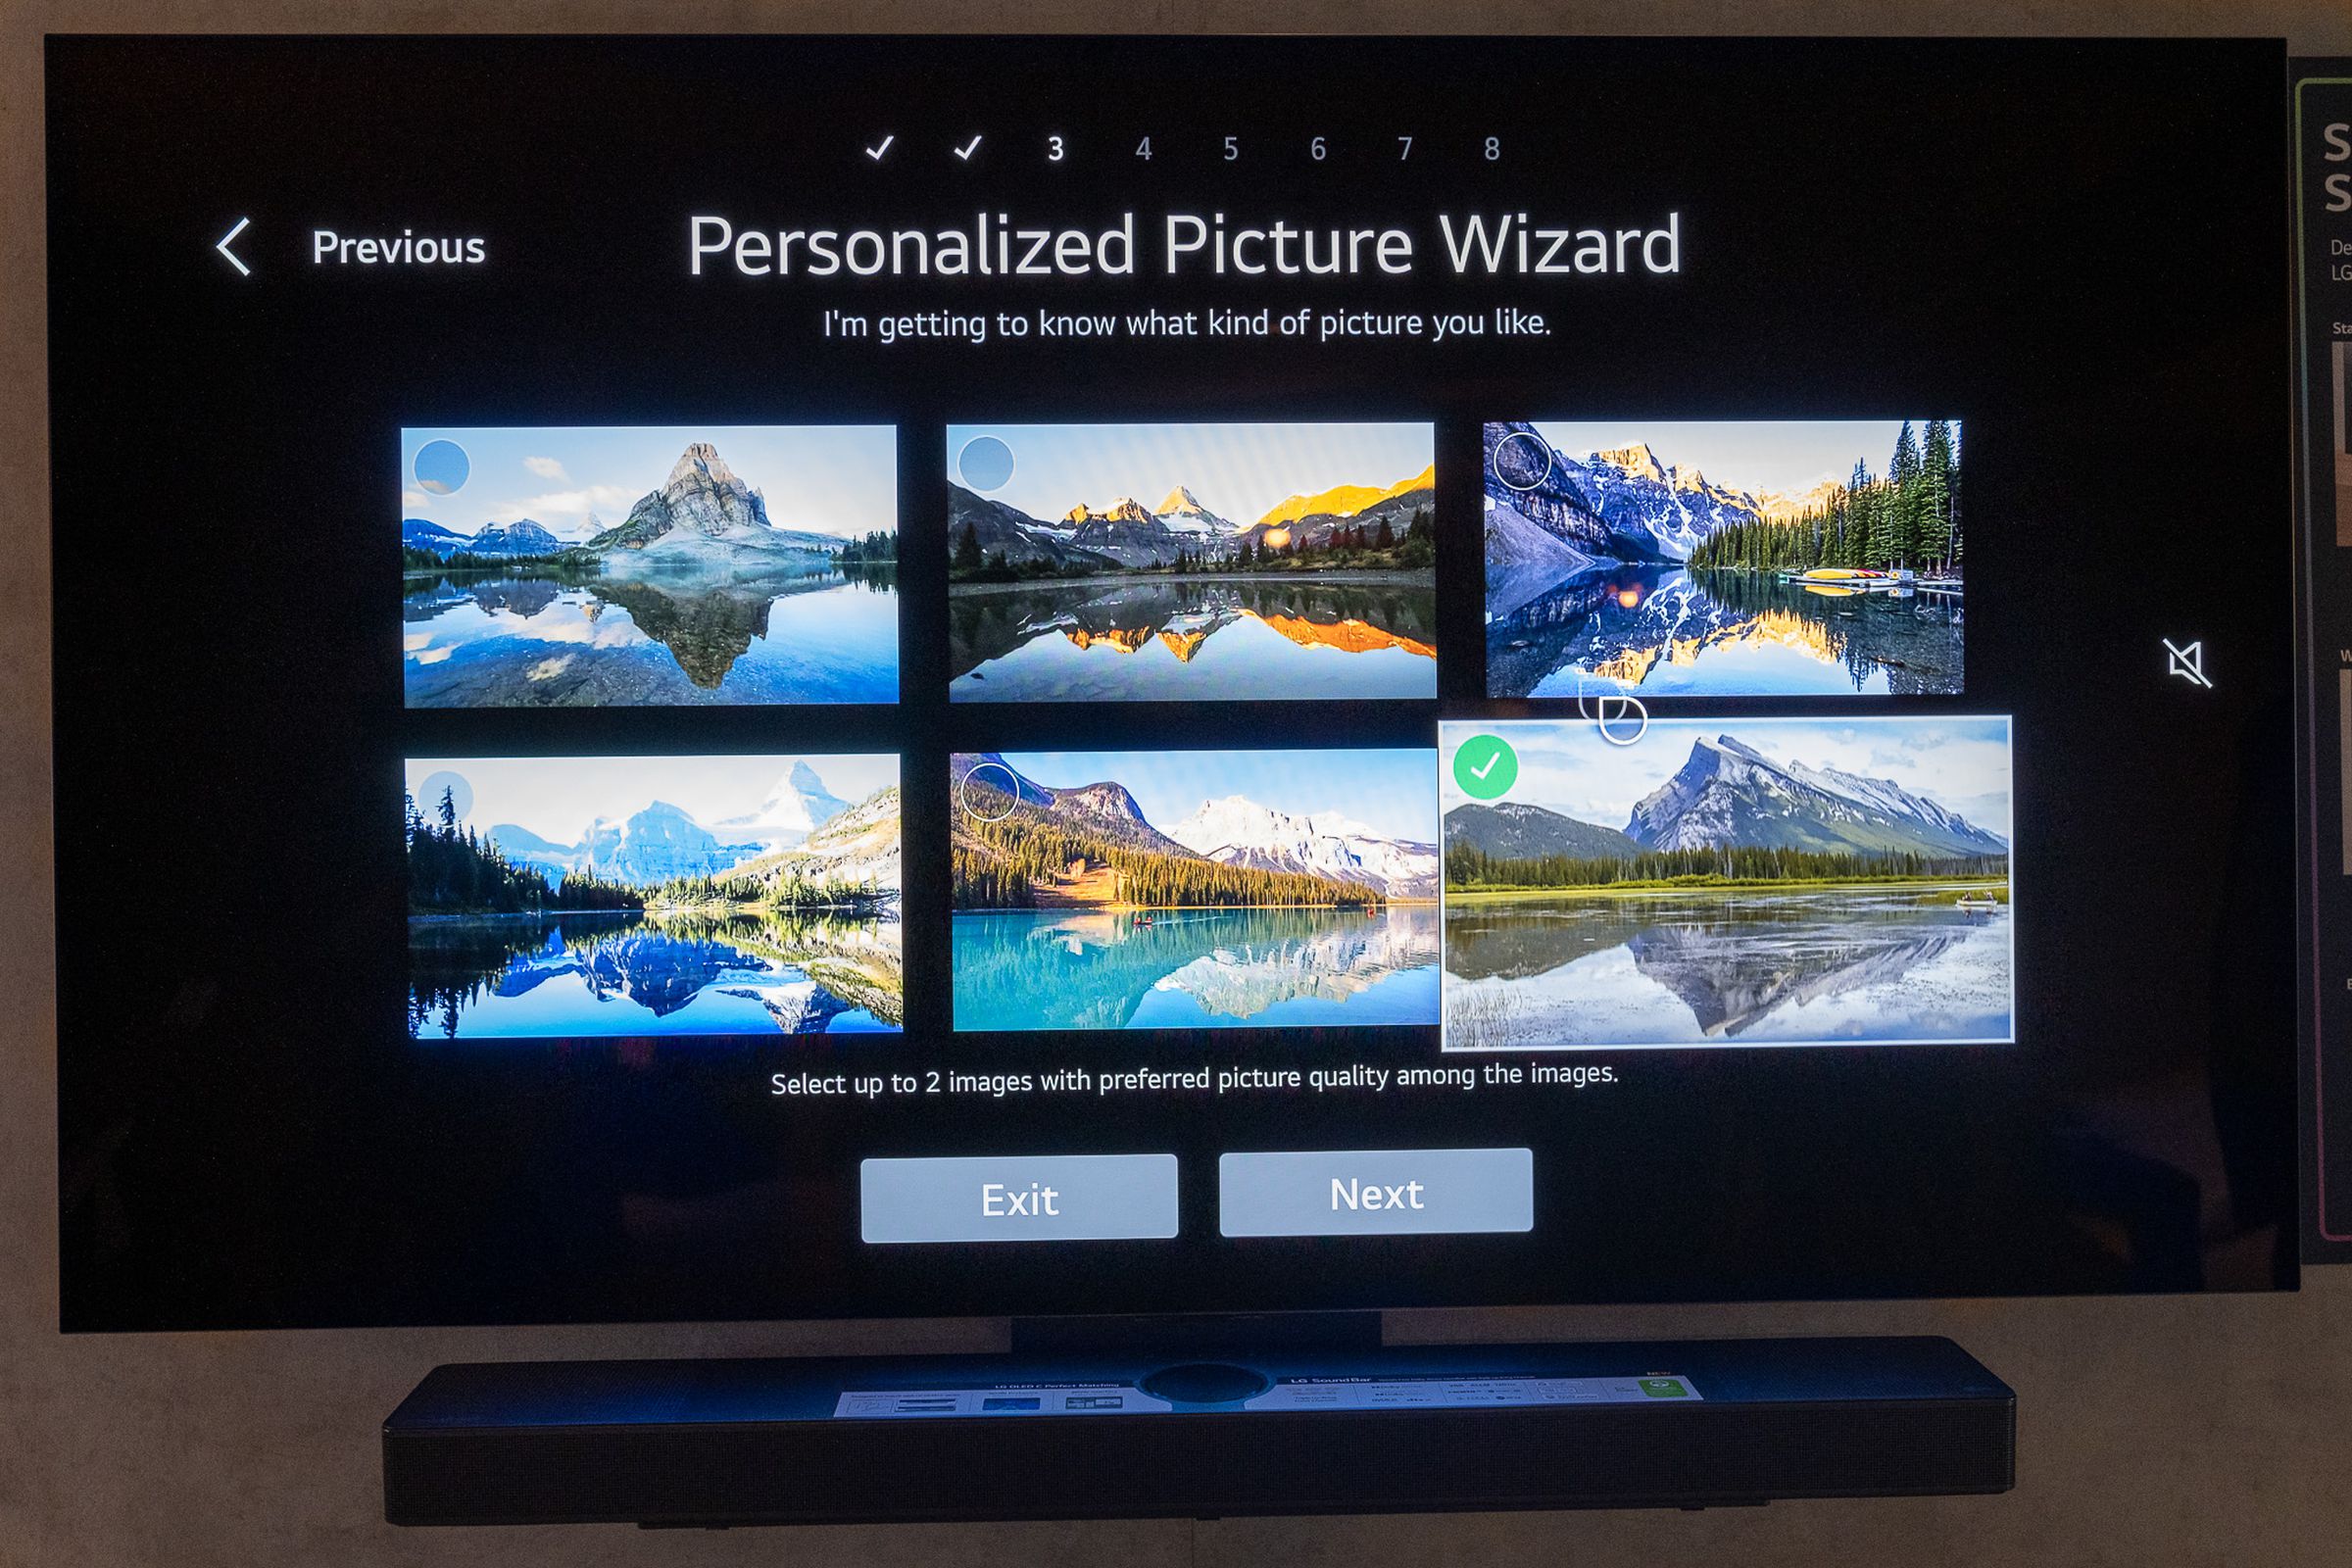 An image showing LG’s new personalized picture wizard software feature on its 2023 TVs.